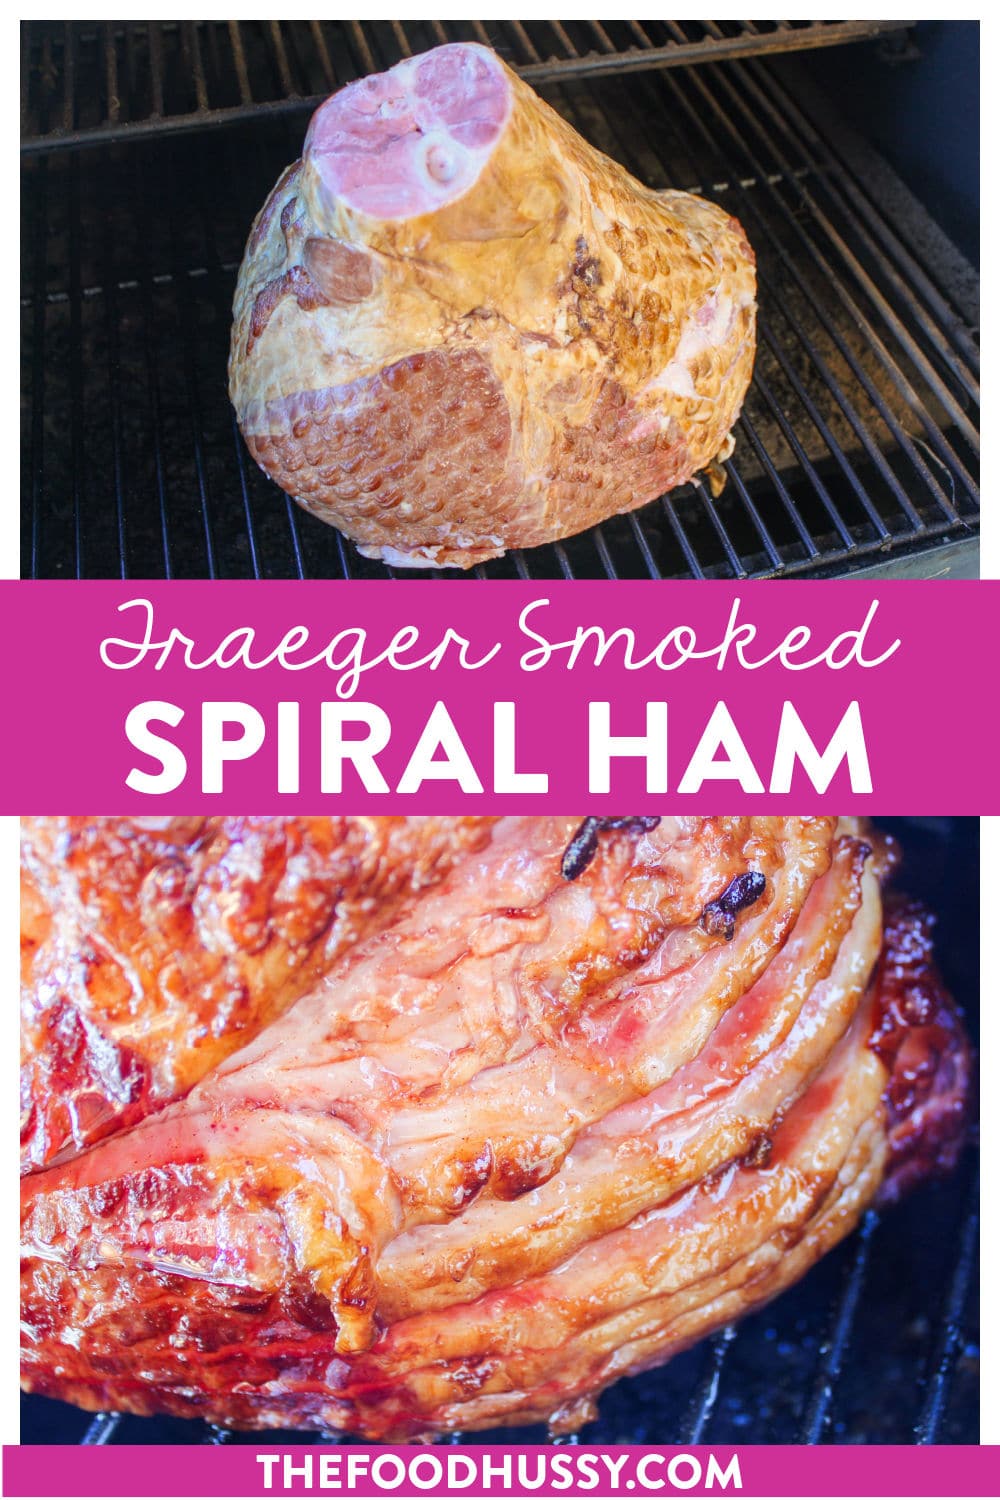 Spiral Smoked Ham is always a favorite holiday meal - because it's easy and delicious. Plus there are so many uses for leftover ham! This classic brown sugar glaze will be a favorite as well! via @foodhussy